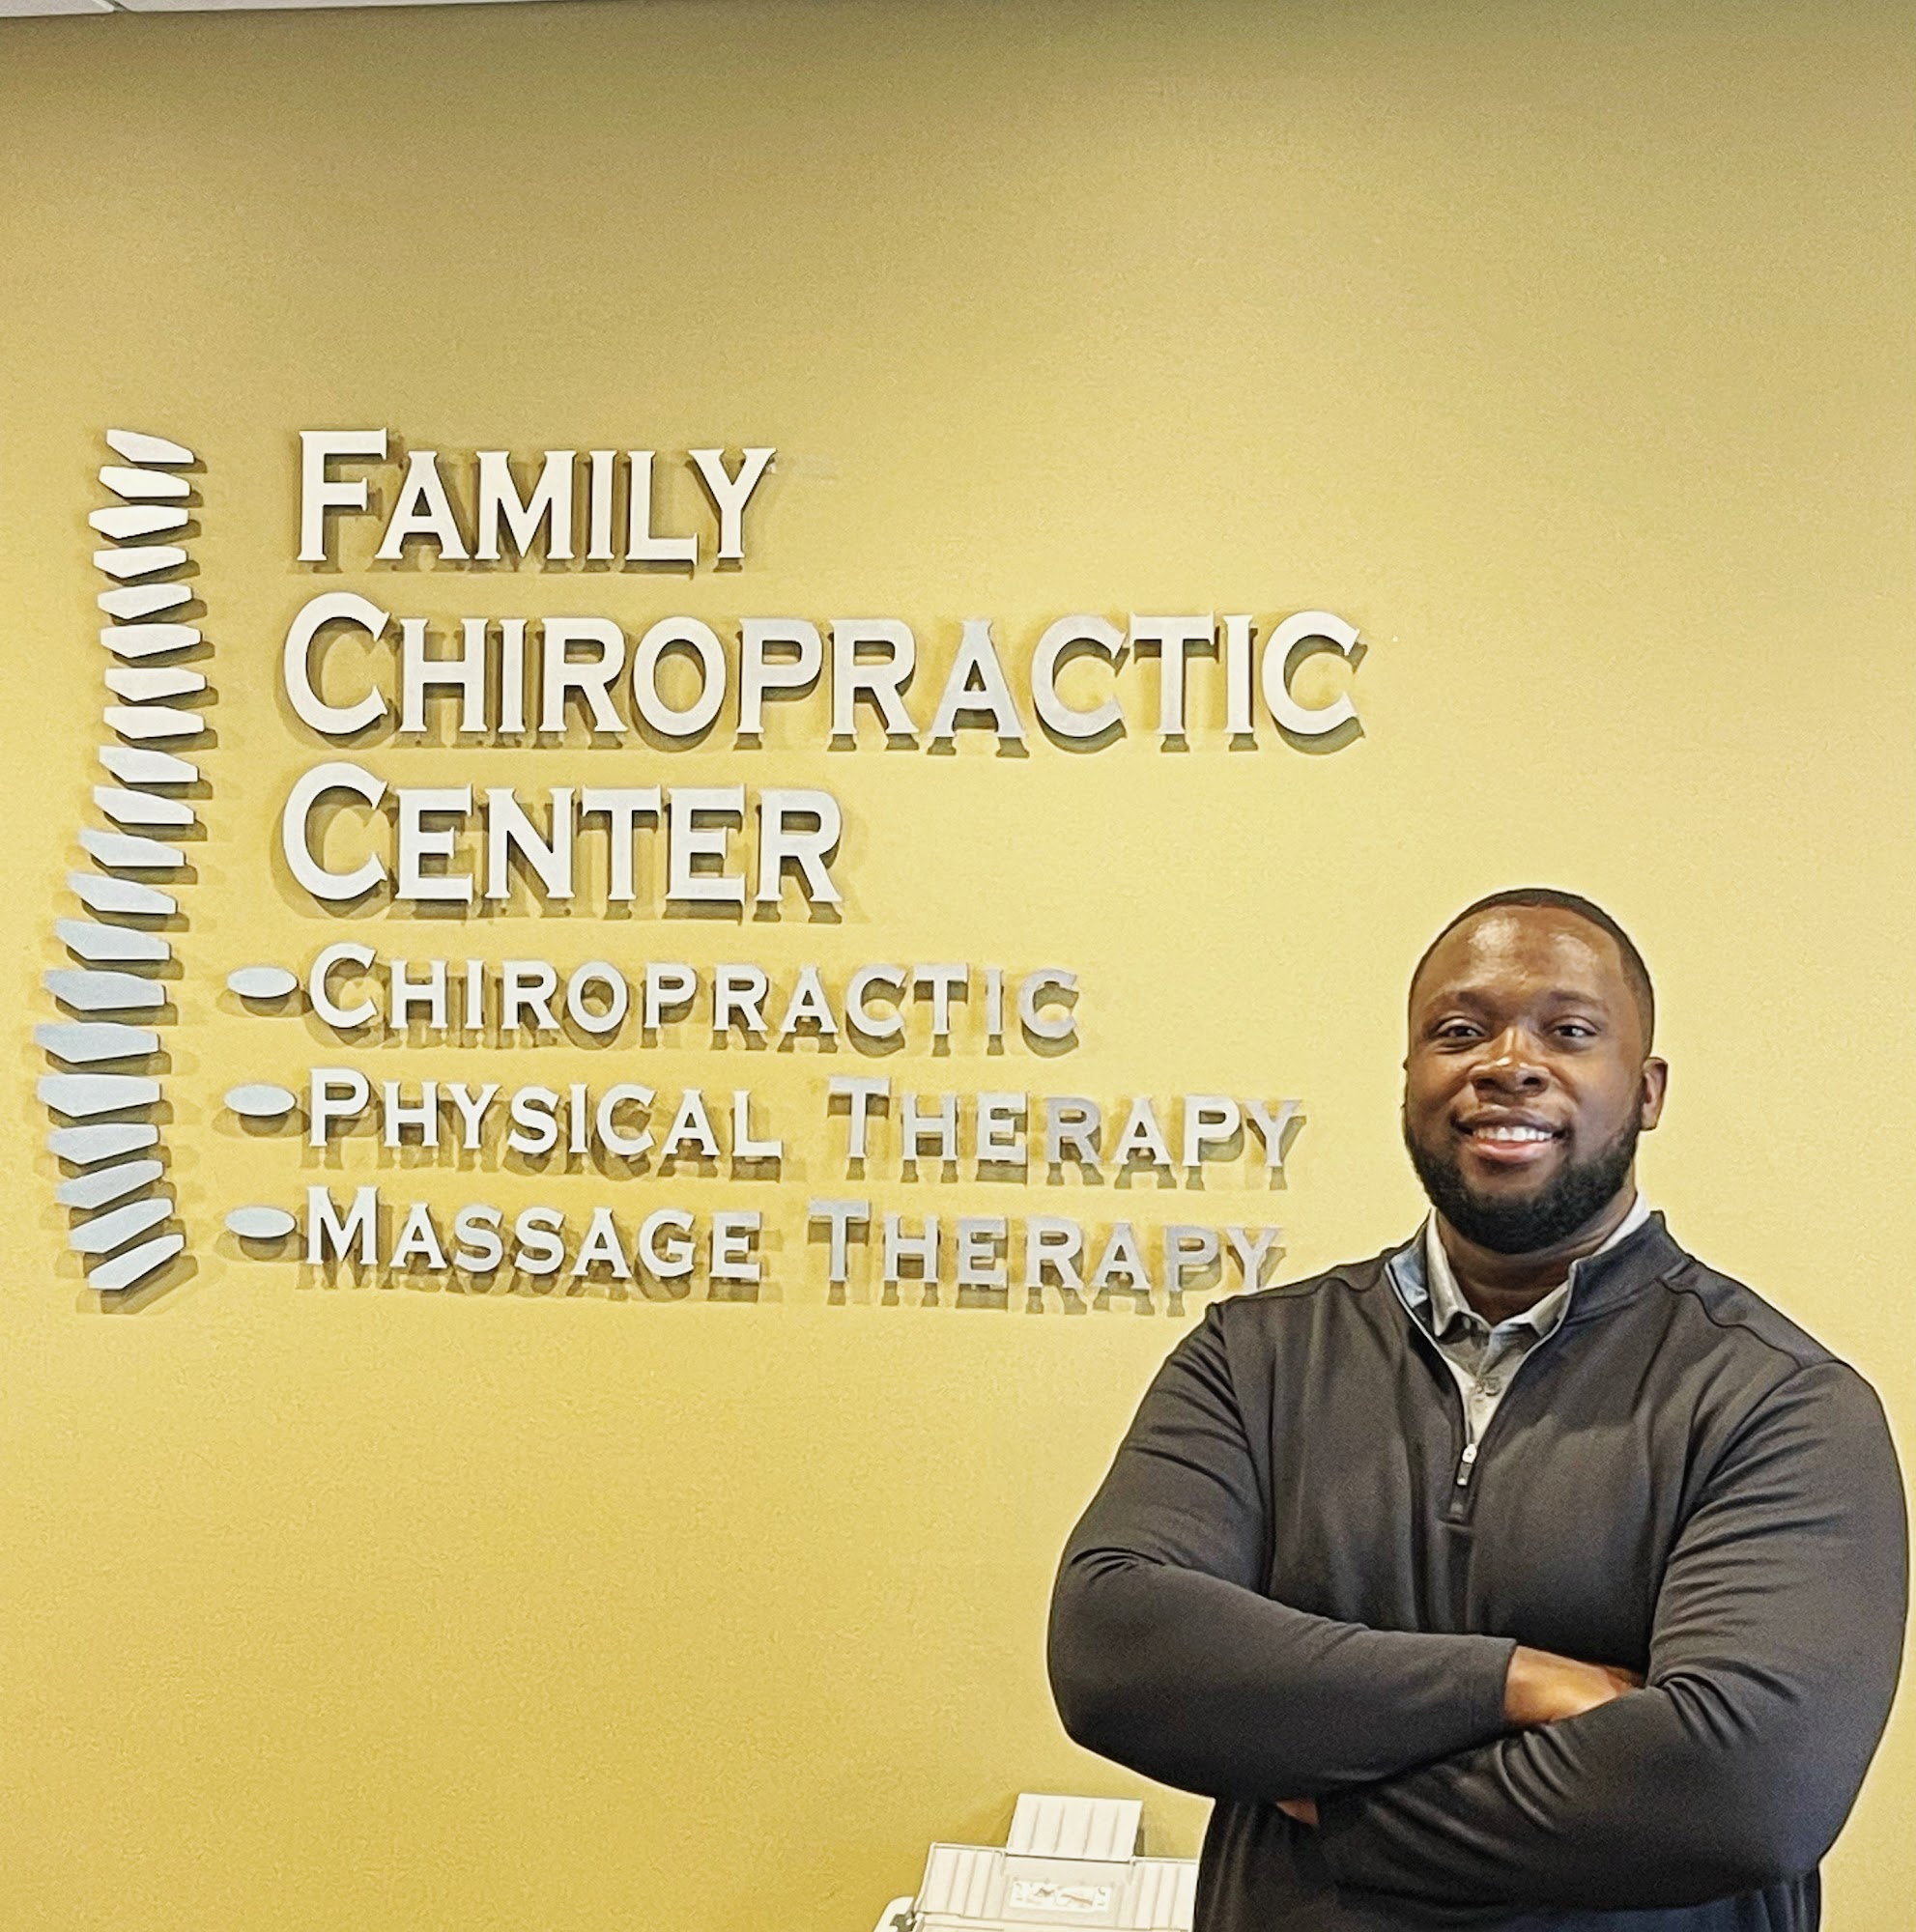 Family Chiropractic Center of Nutley